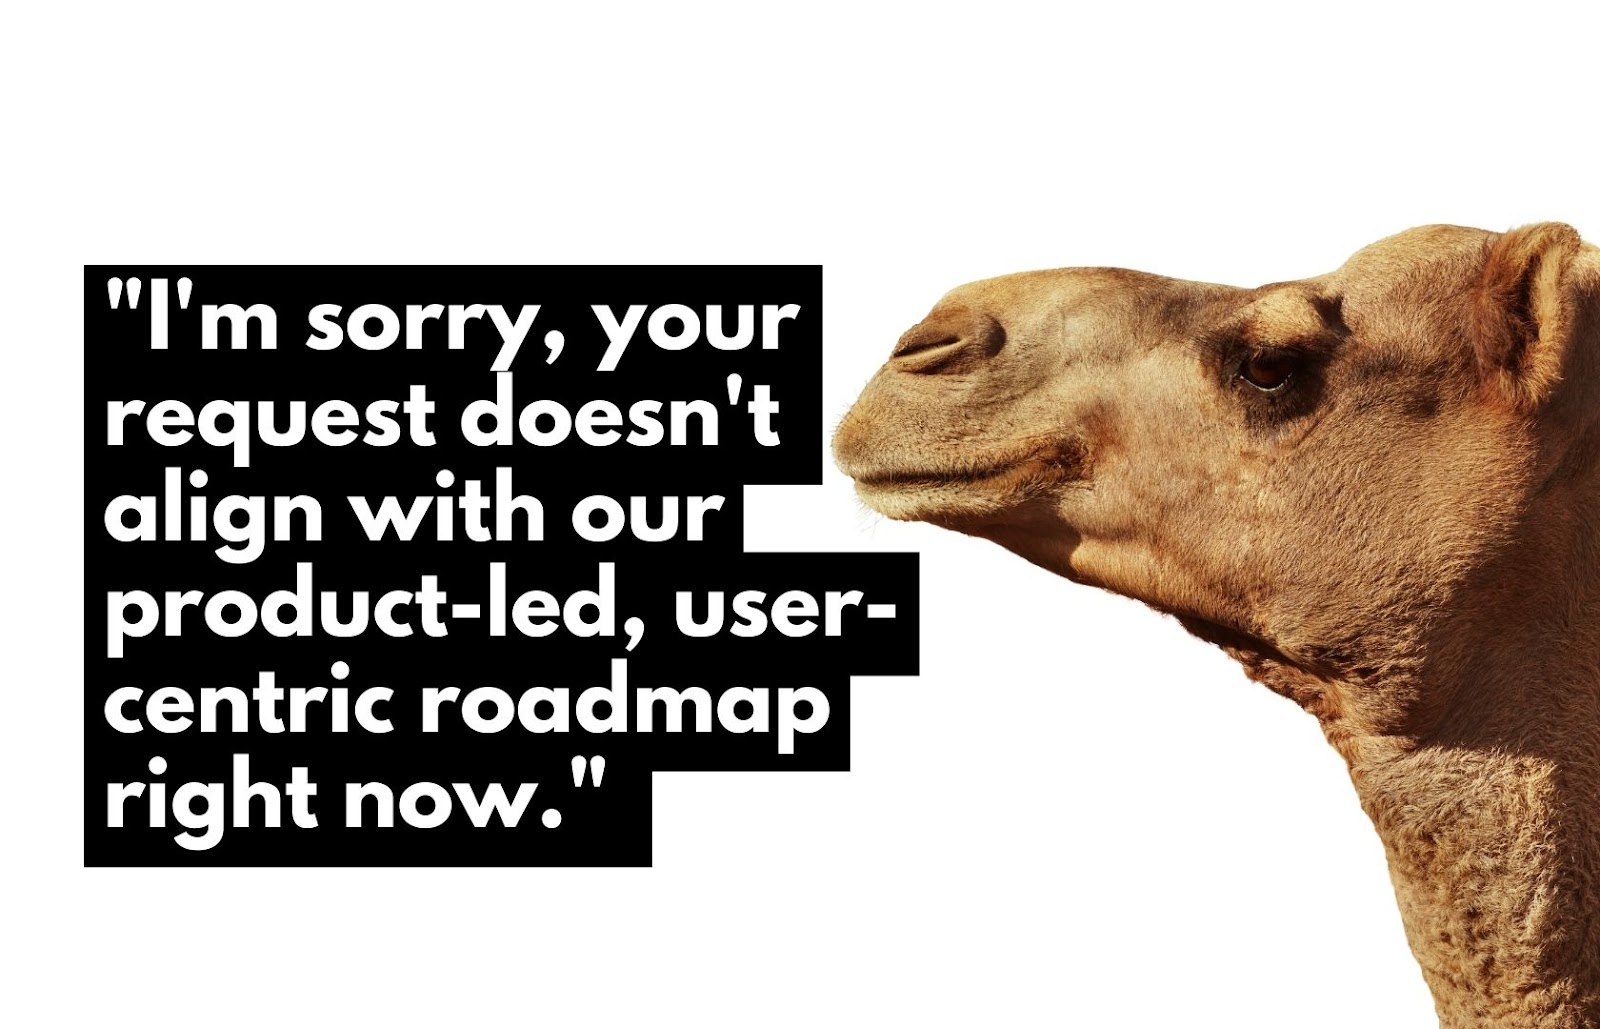 "I'm sorry, your request doesn't align with our product-led, user-centric roadmap right now." Image of a camel